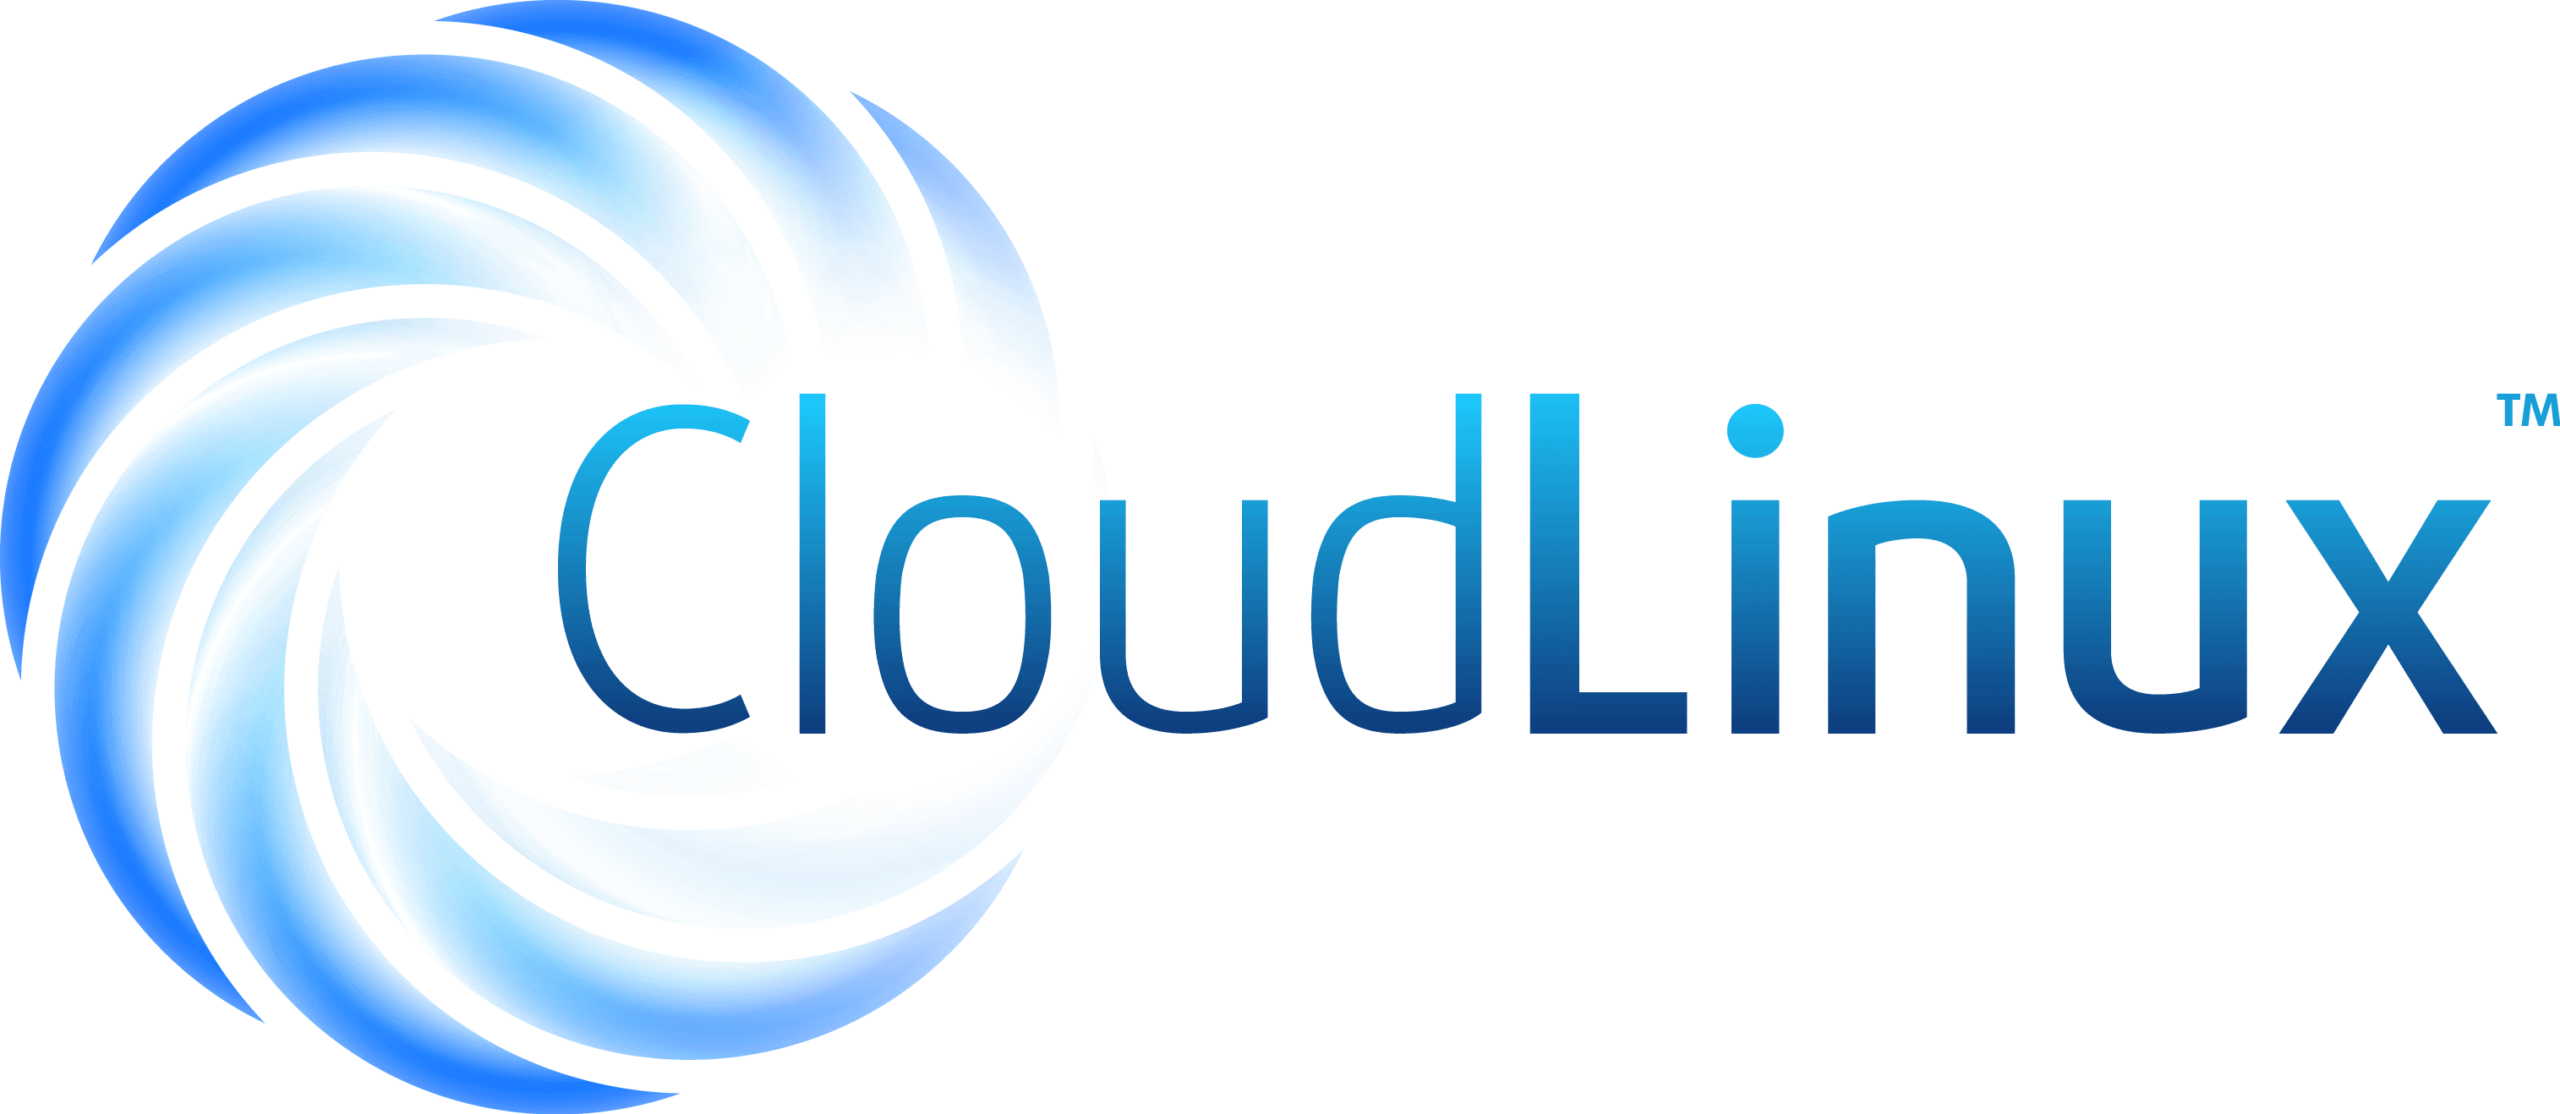 CloudLinux; Optimize your site speed